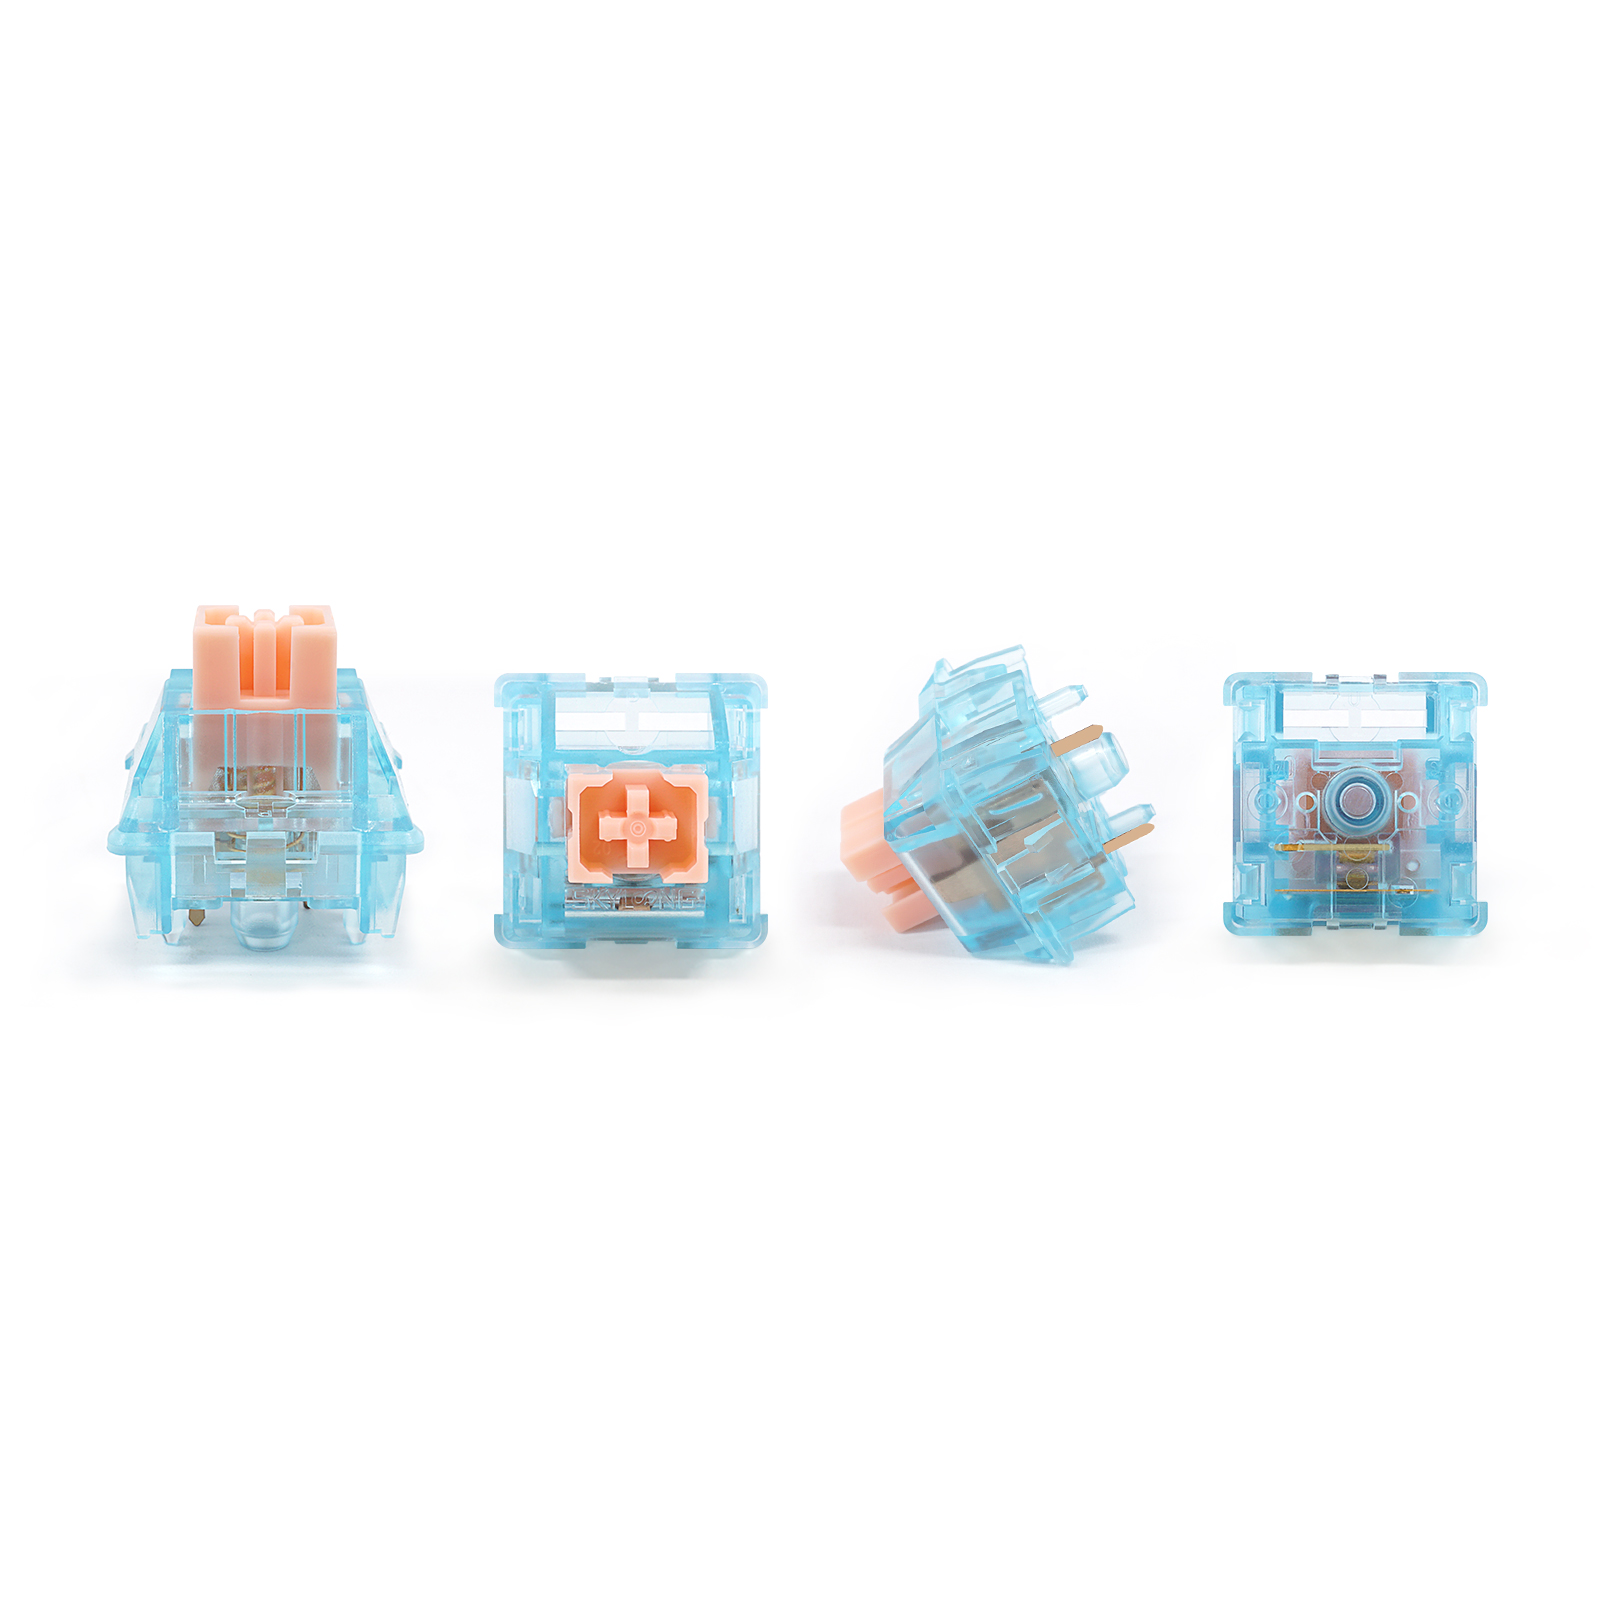 Glacier Skyloong Mechanical Switches